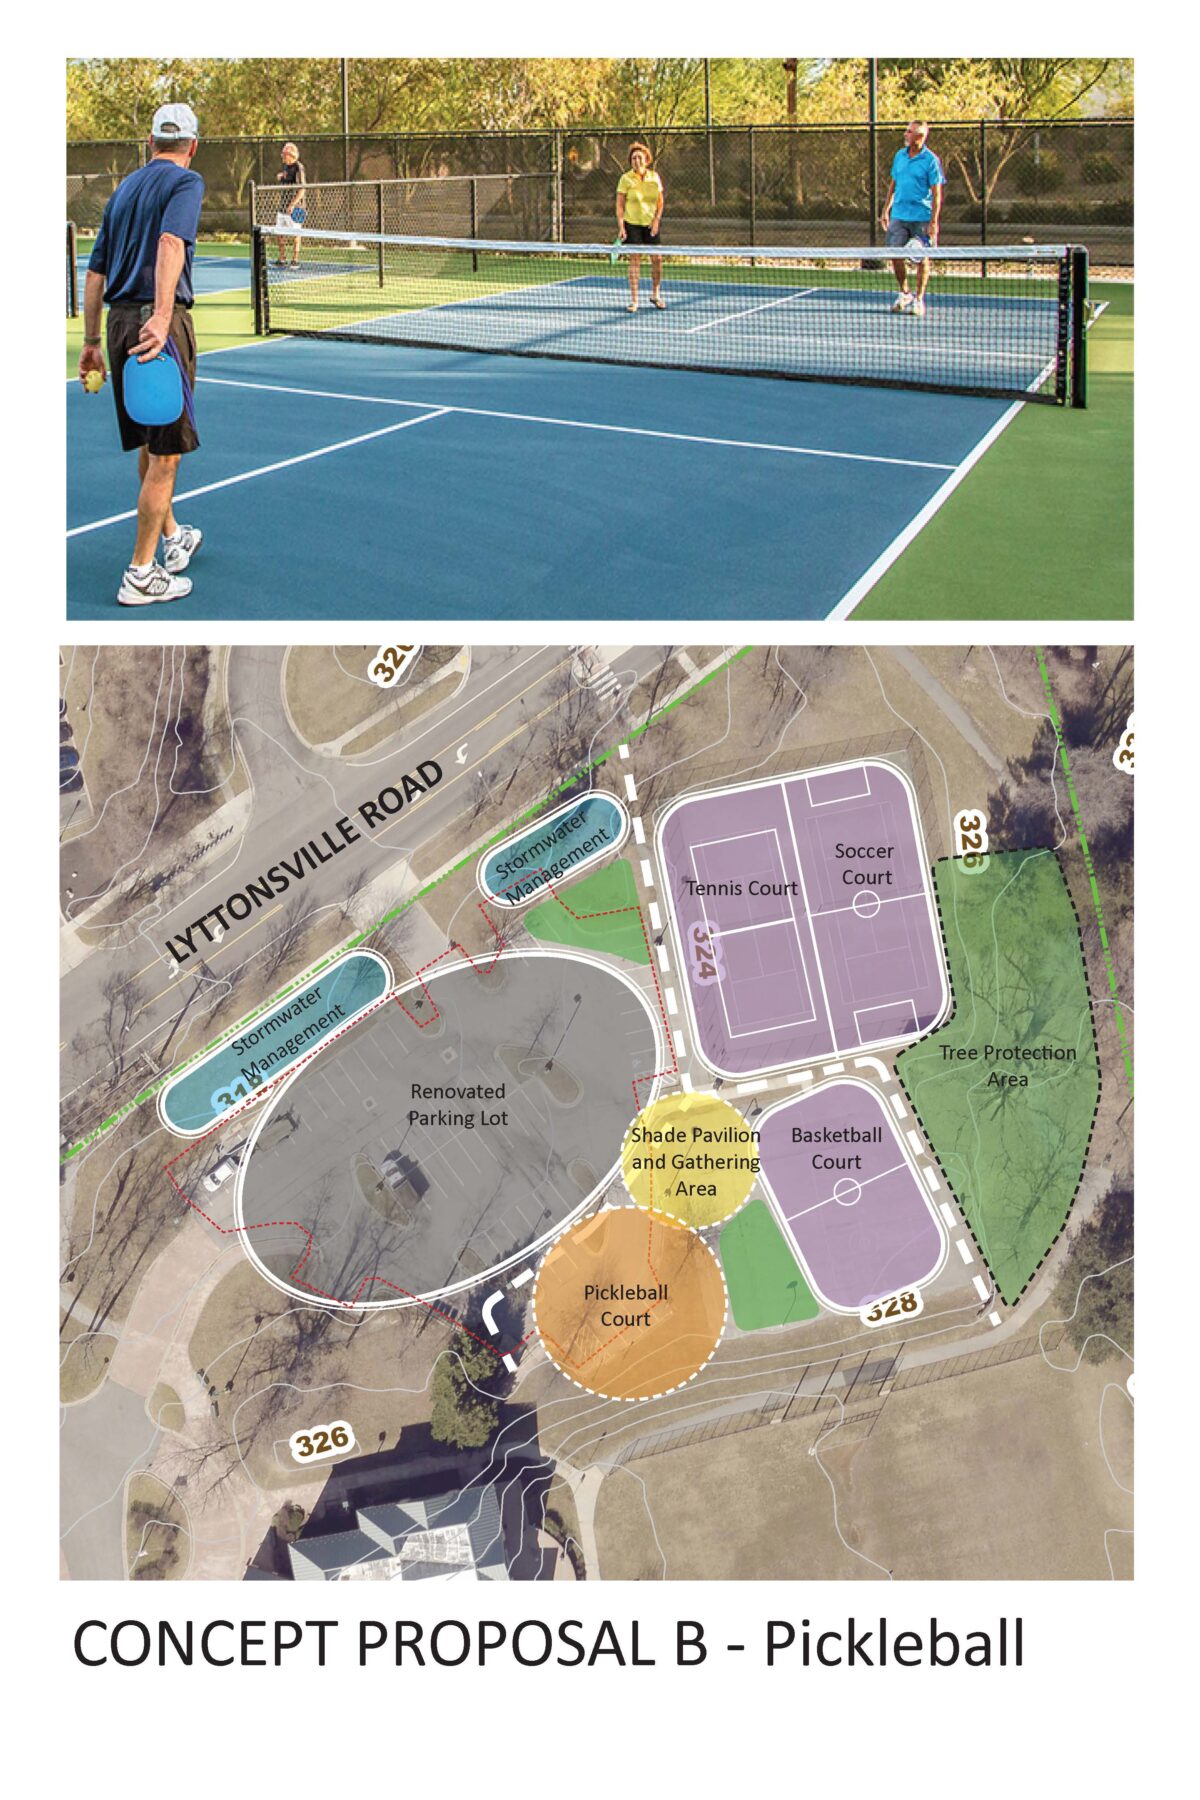 Image of people playing on a pickleball court. Image of a map of Rosemary Hills - Lyttonsville Local Park with locations of new amenities such as include a pickleball court, shade pavilion, and updated courts